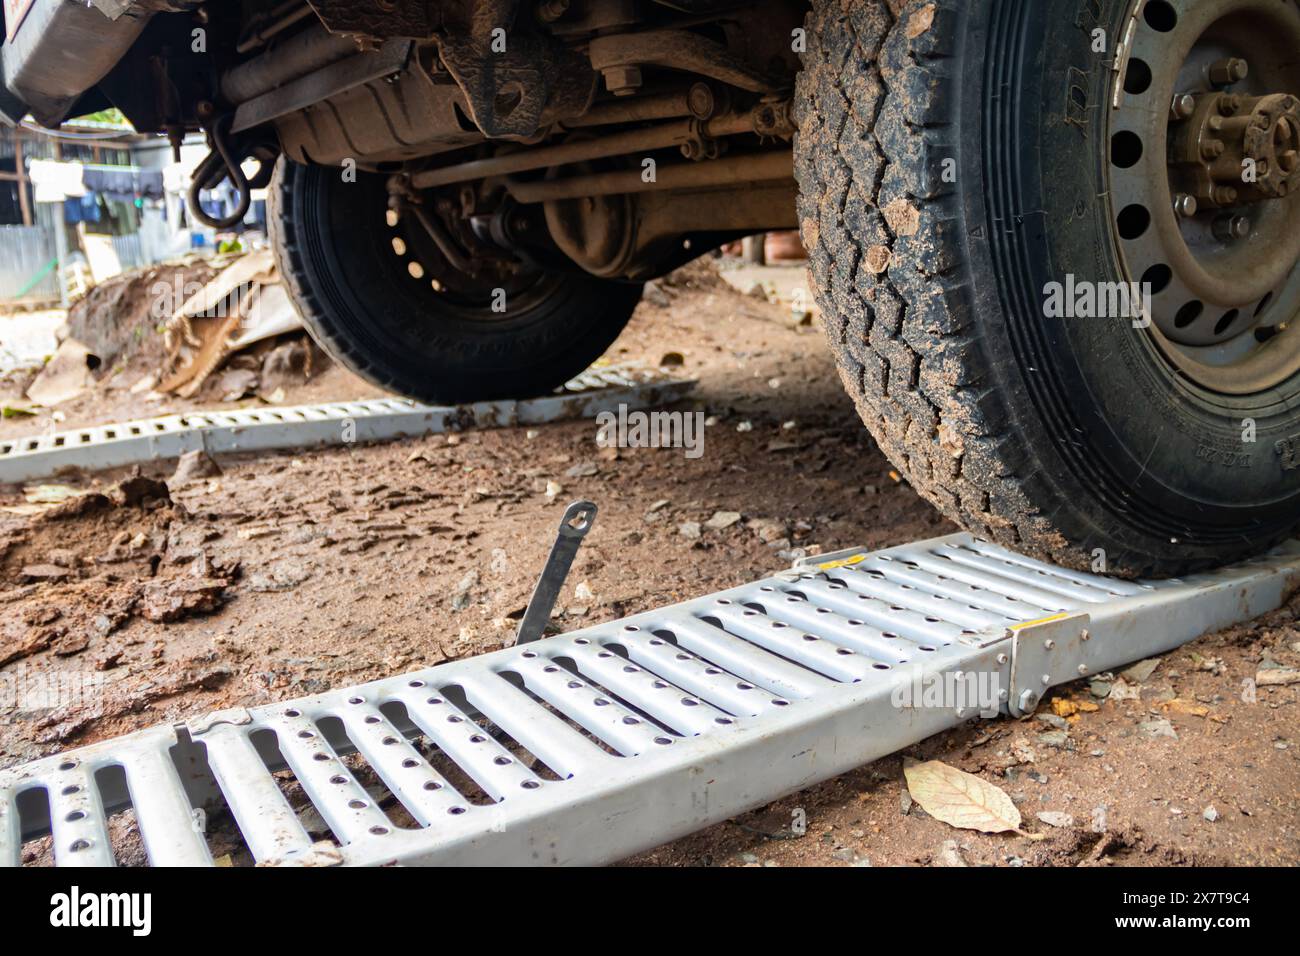 Recovery equipment for unstacking 4x4 vehicle out of muddy road, sand plates, mechanical winch, pooling ropes, high lift jack, shovel Stock Photo